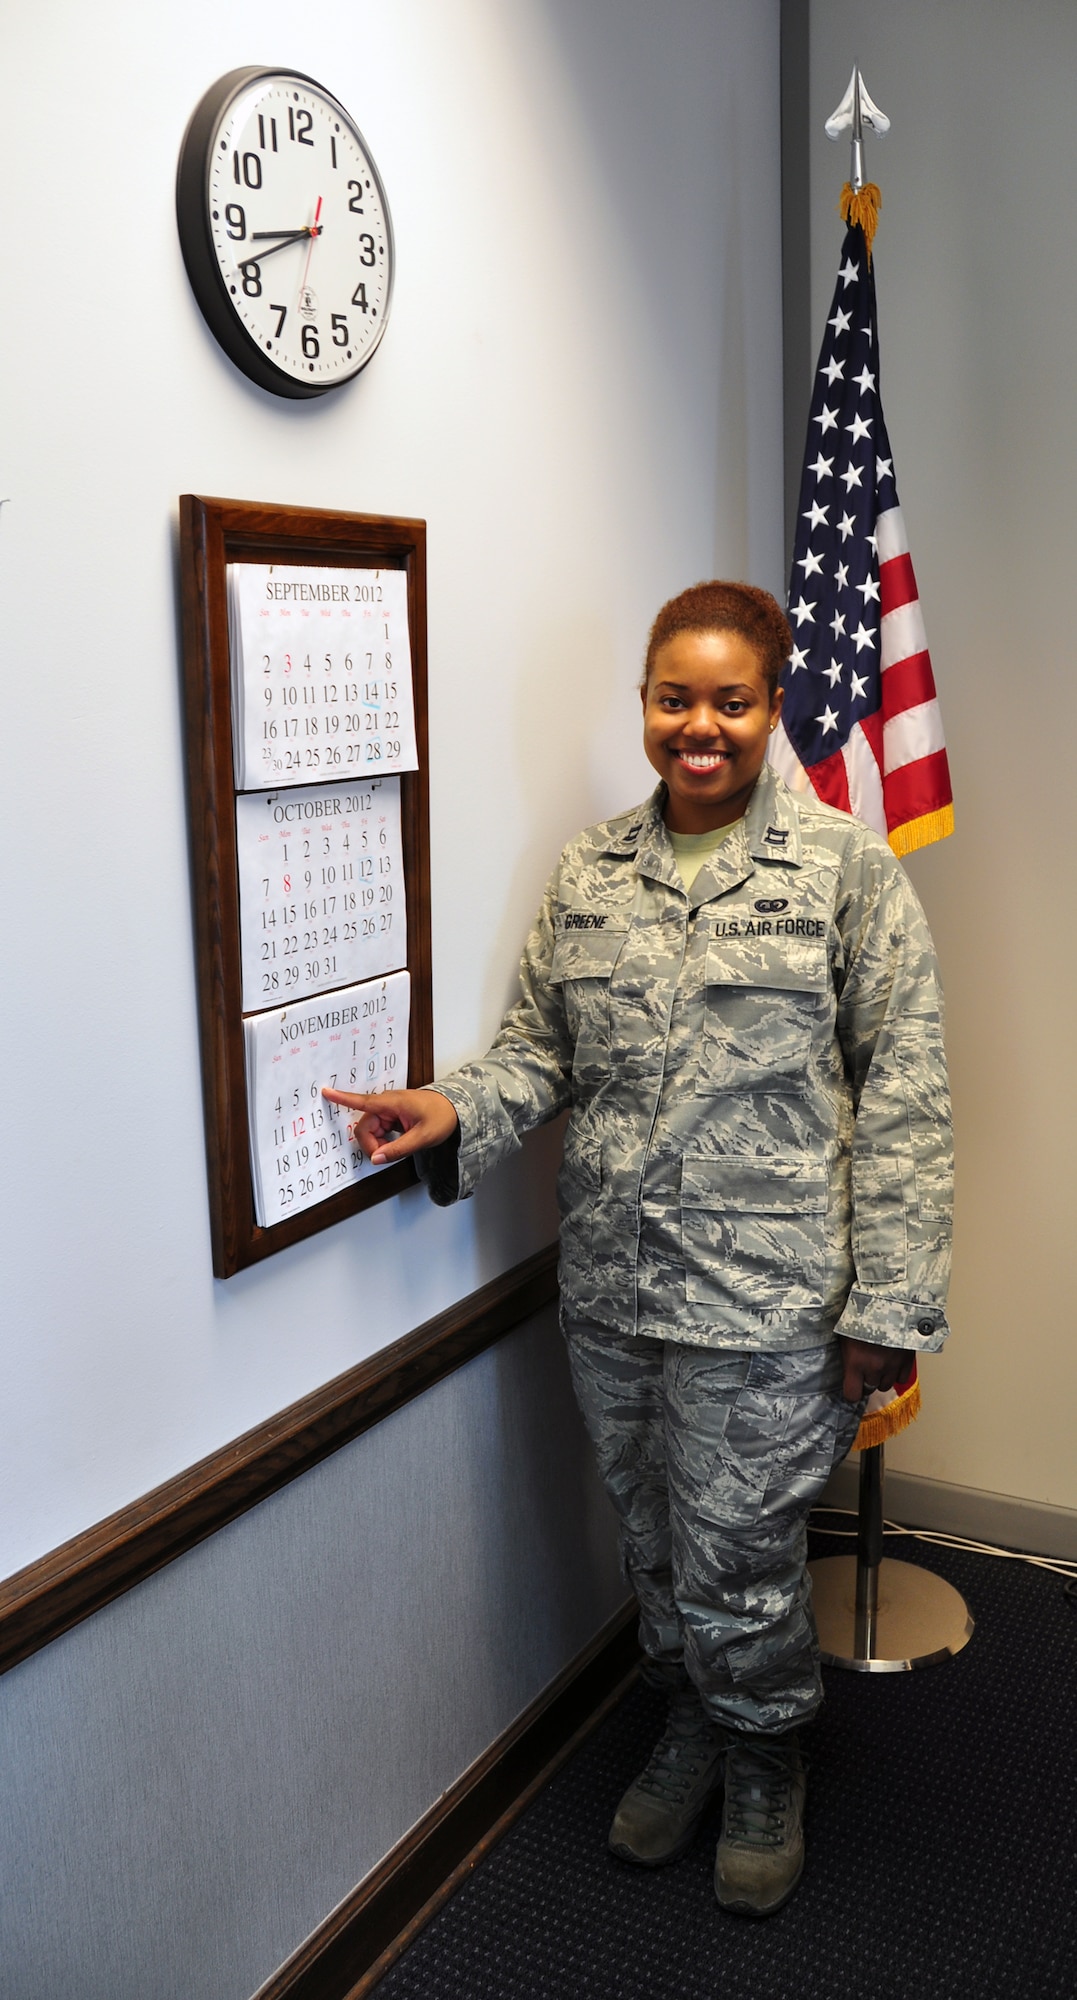 Capt. Melissa Z. Greene, 94th Airlift Wing executive officer, points out when Election Day is on her office calendar. Election Day is Nov. 6, less than two months away. (U.S. Air Force photo/Senior Airman Elizabeth Van Patten)